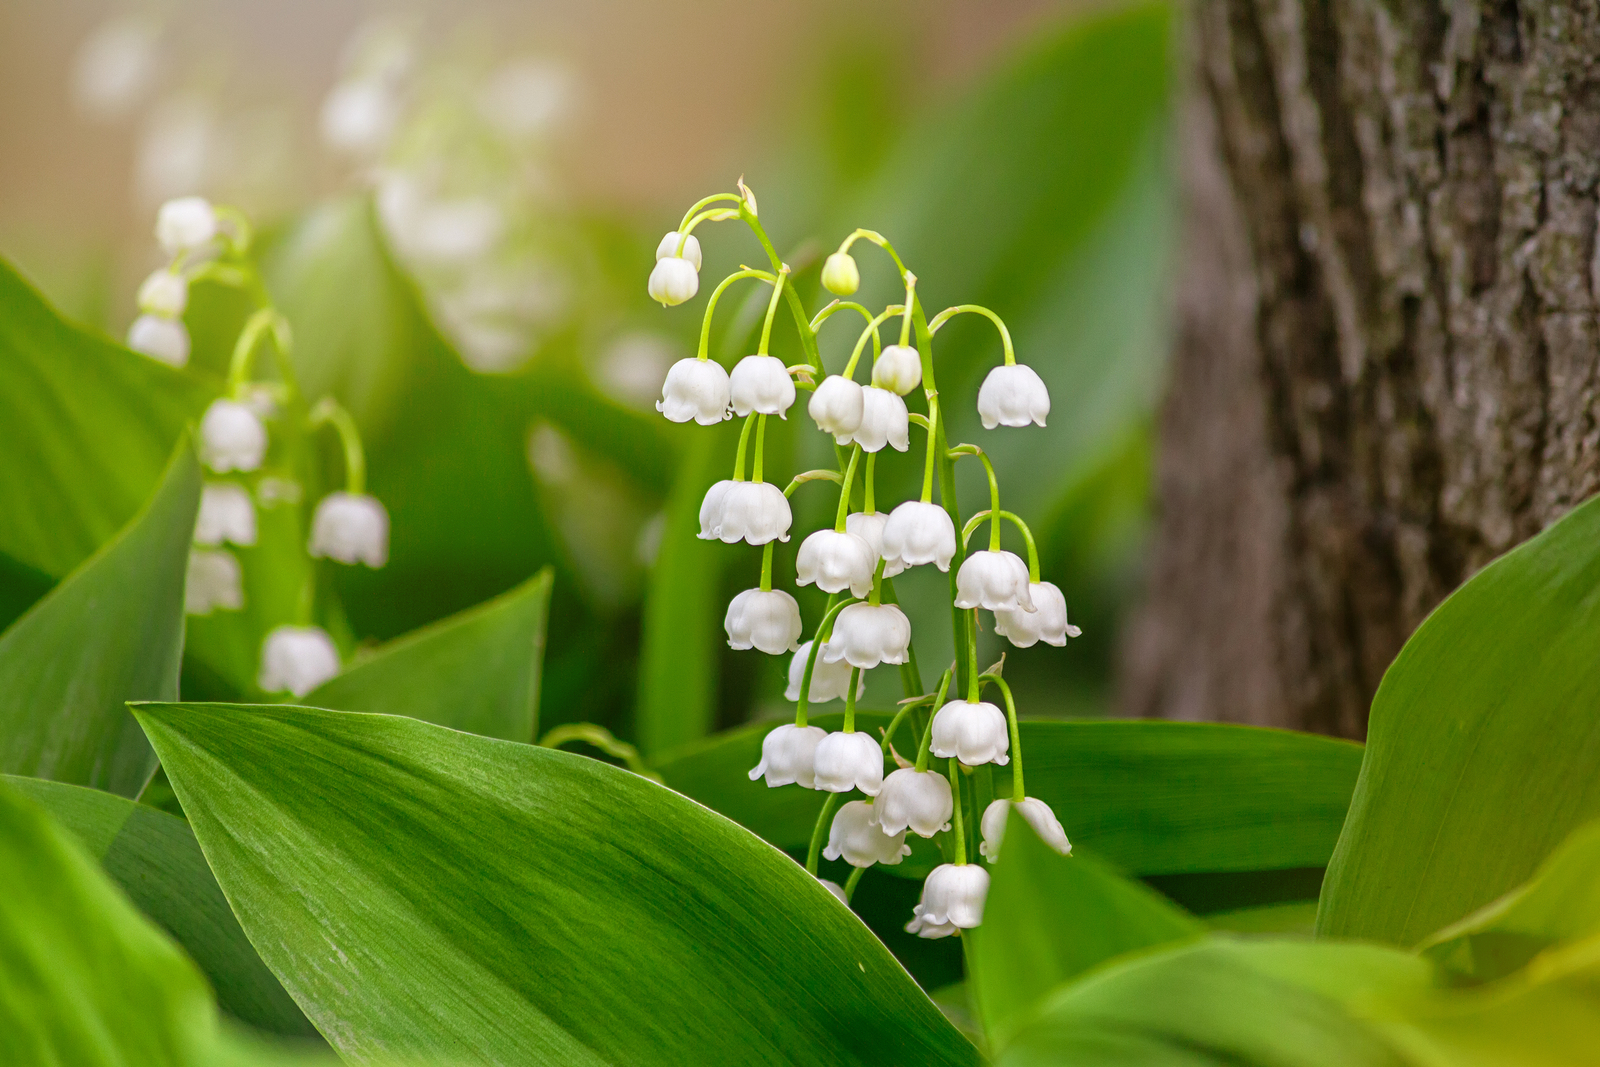 Lily of the valley (Convallaria majalis